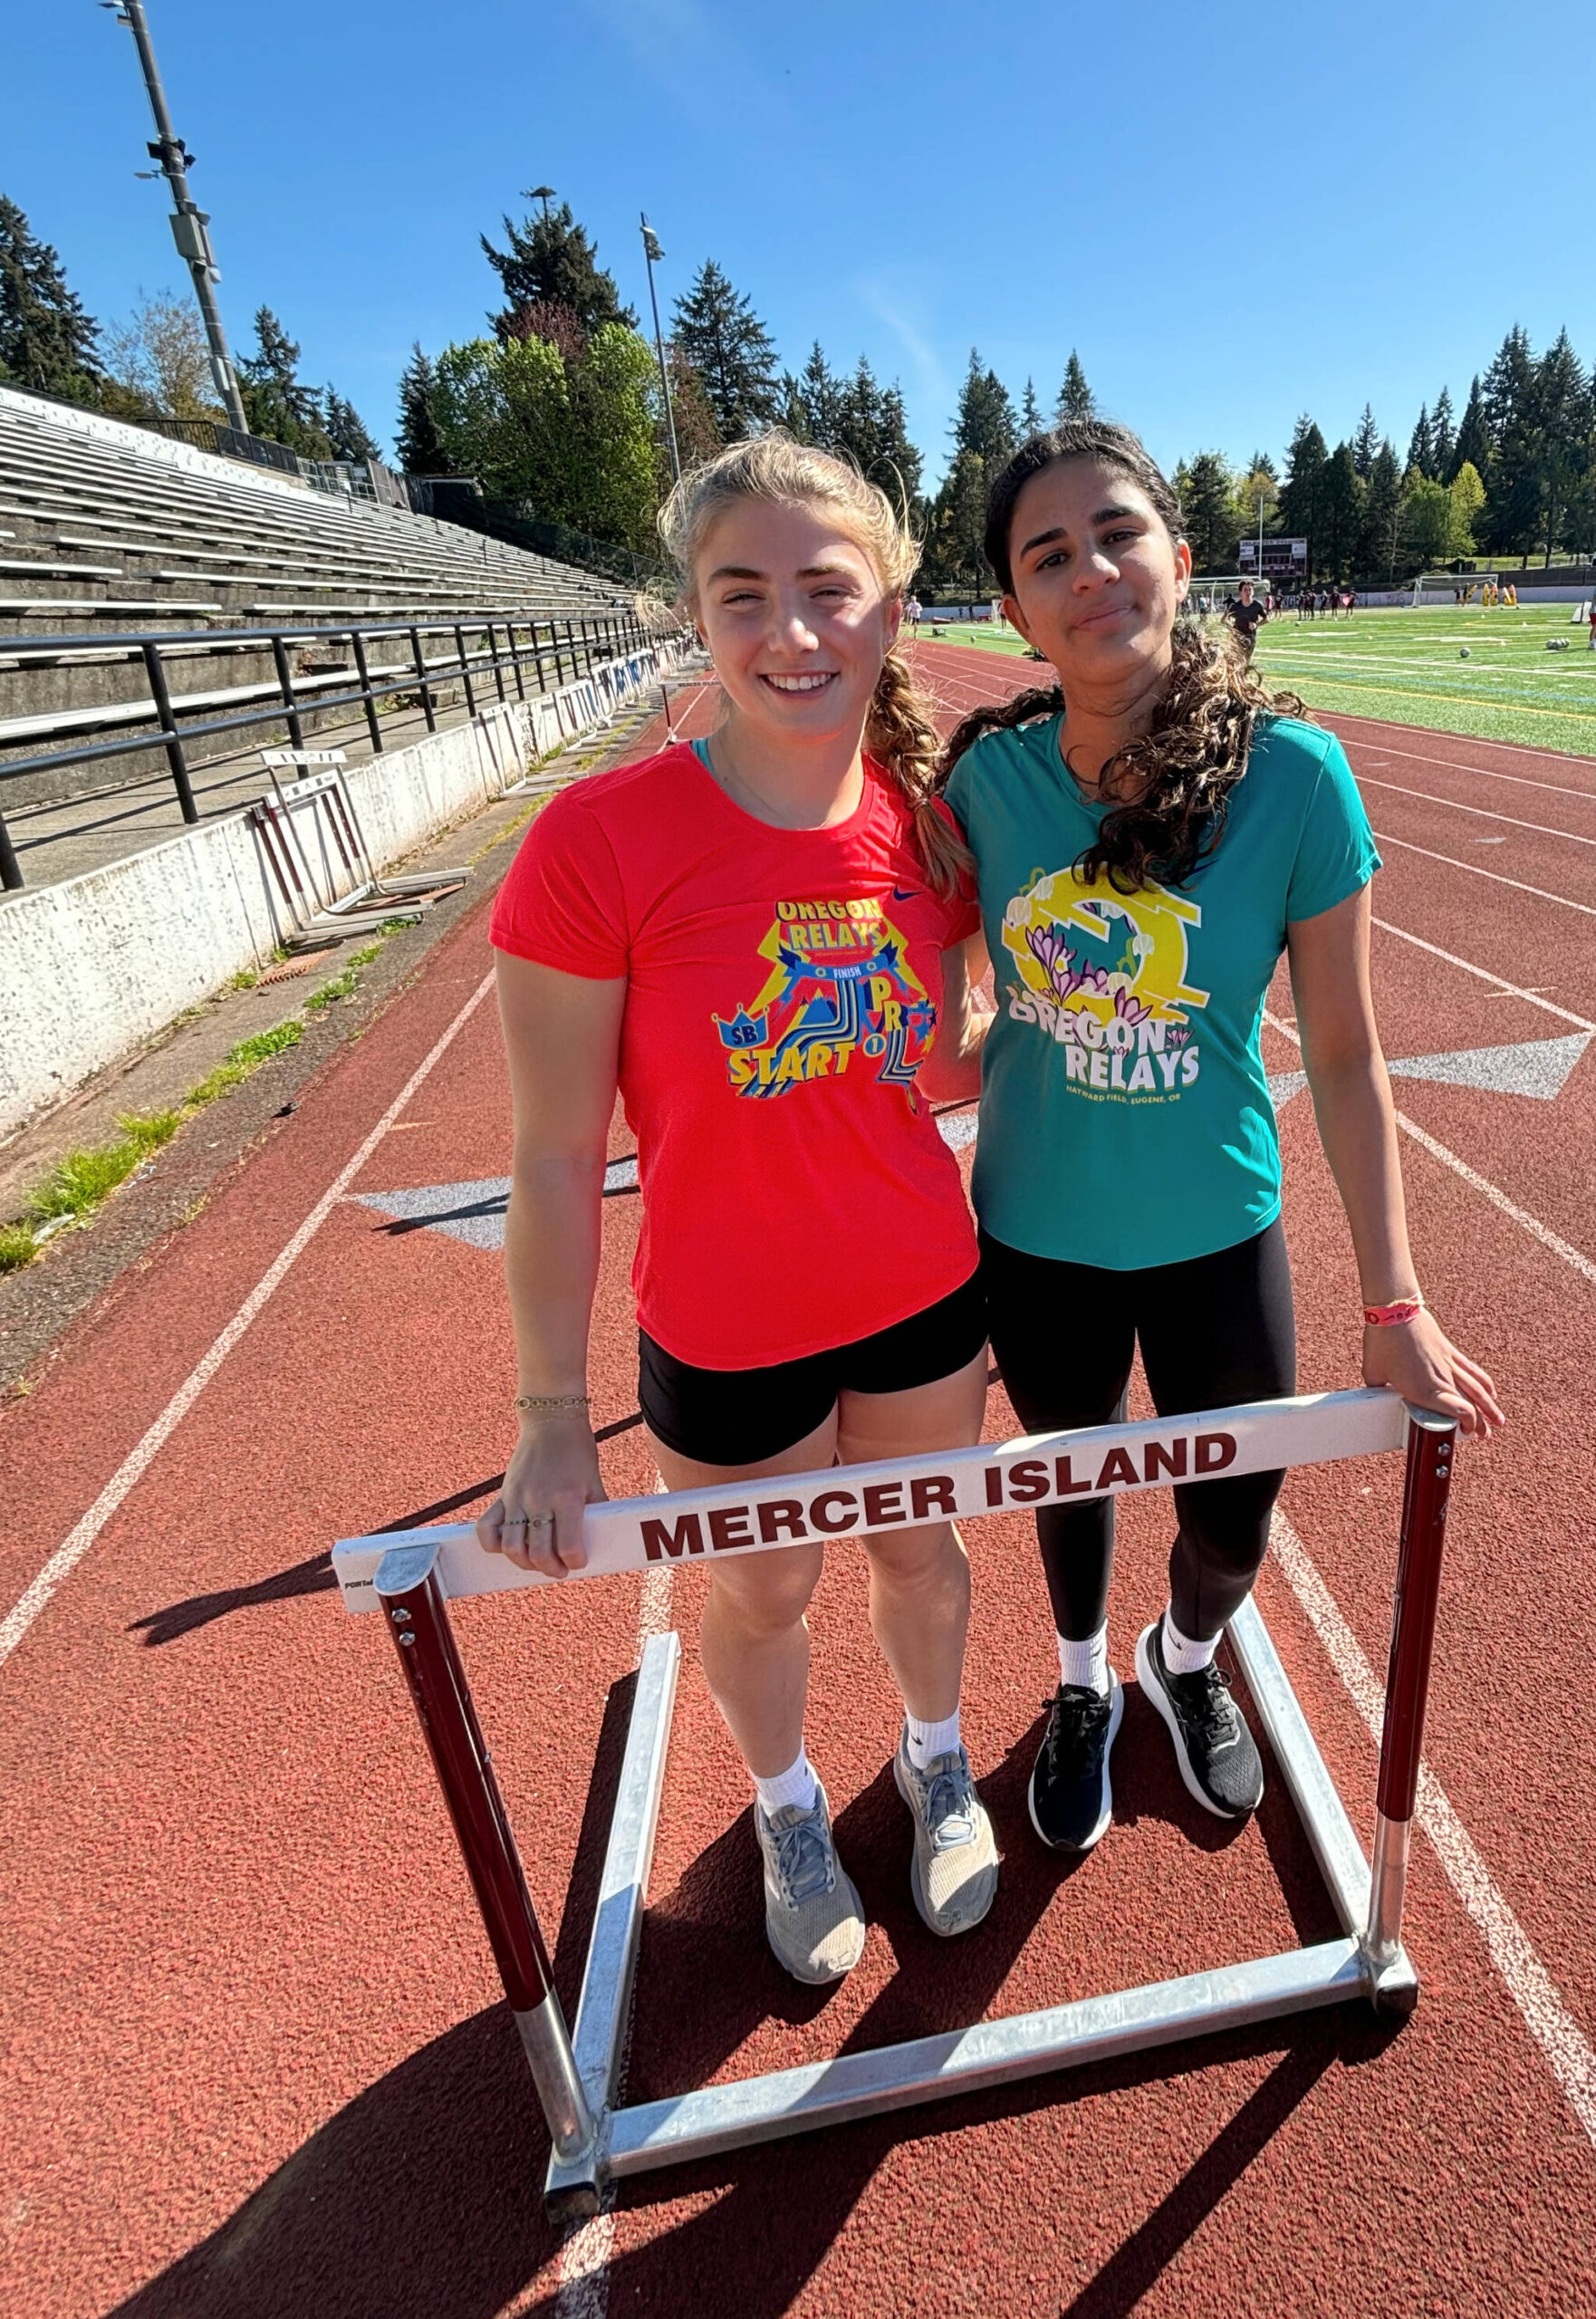 Mercer Island High School sophomores Eloise Newman, left, and Aaliyah Khan take a break from track and field training on April 22. Andy Nystrom/ staff photo